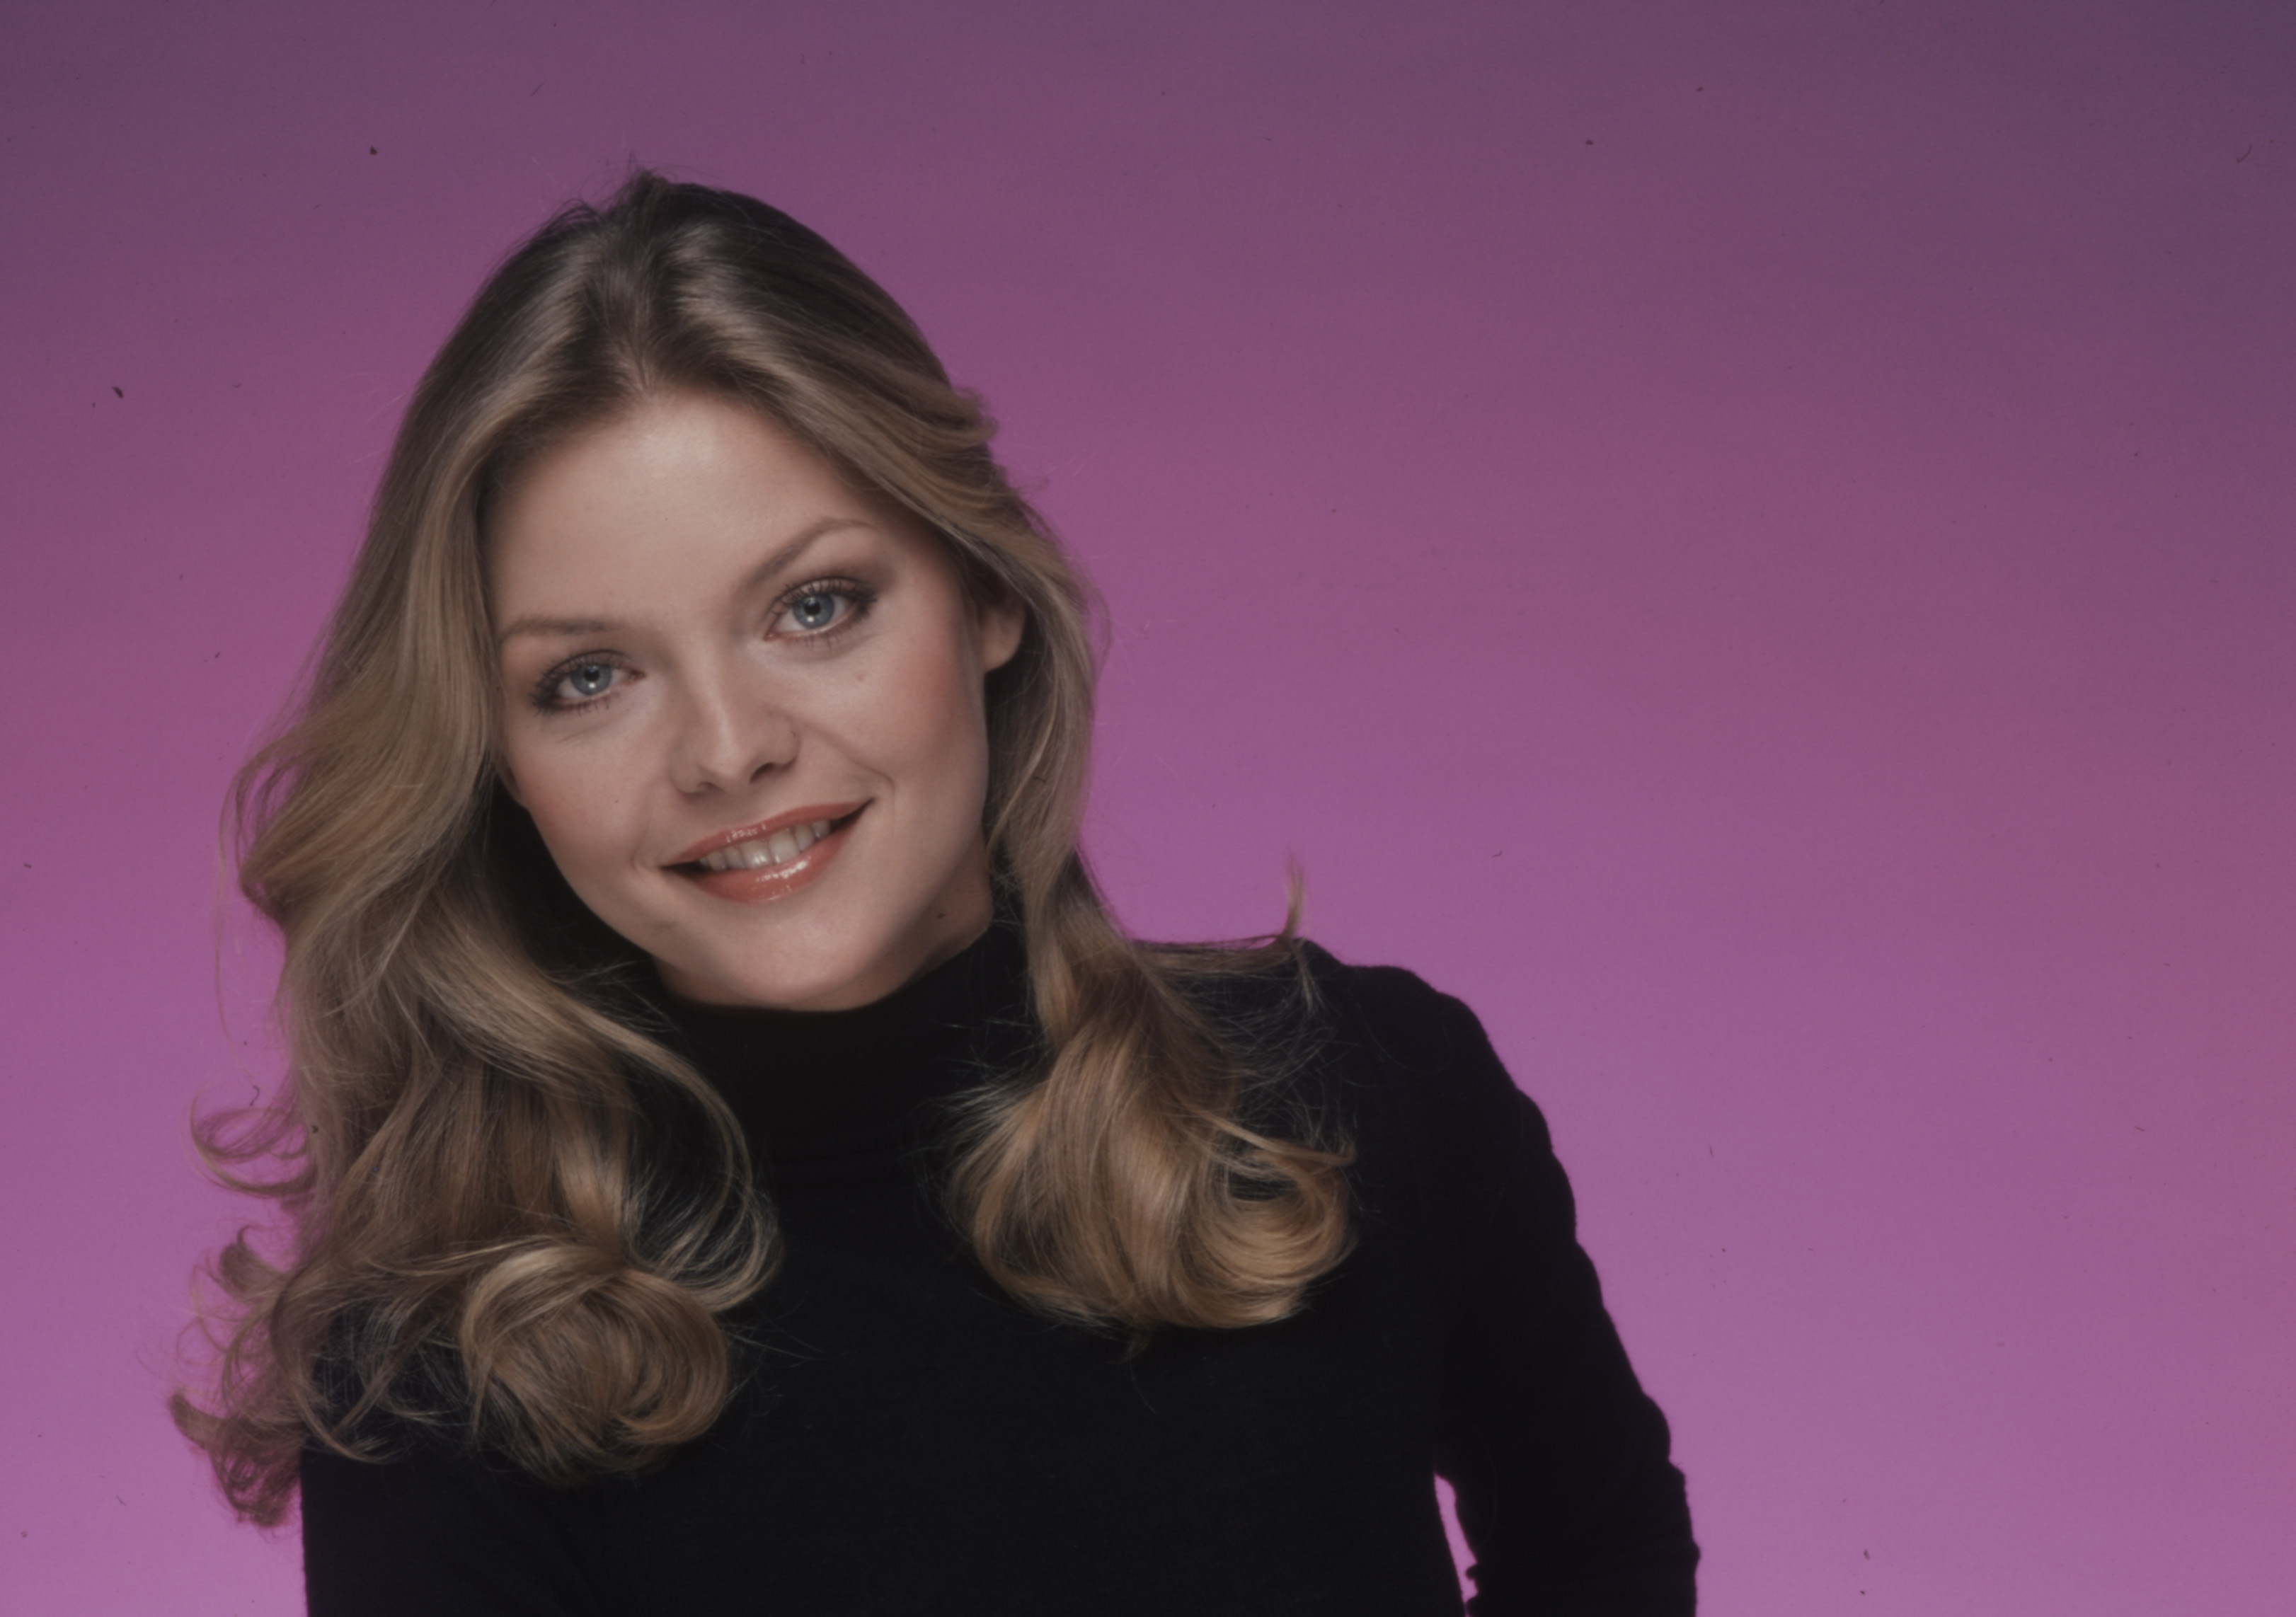 Michelle Pfeiffer poses for a promotional photo for the ABC show "Delta House" on January 2, 1979 in Los Angeles, California Michelle Pfeiffer | Source: Getty Images